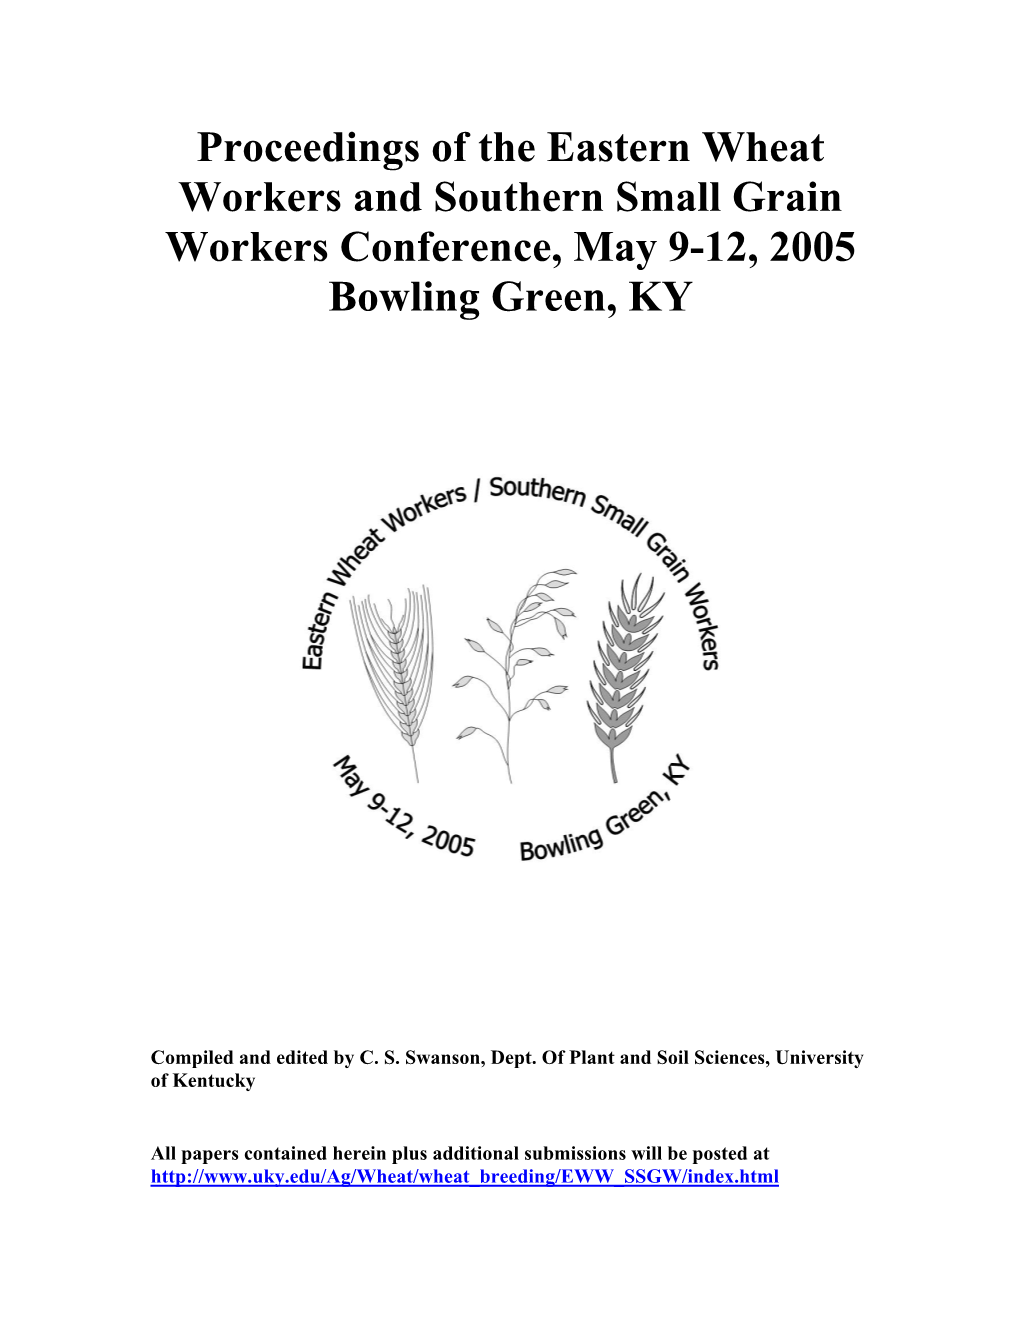 Proceedings of the Eastern Wheat Workers and Southern Small Grain Workers Conference, May 9-12, 2005 Bowling Green, KY